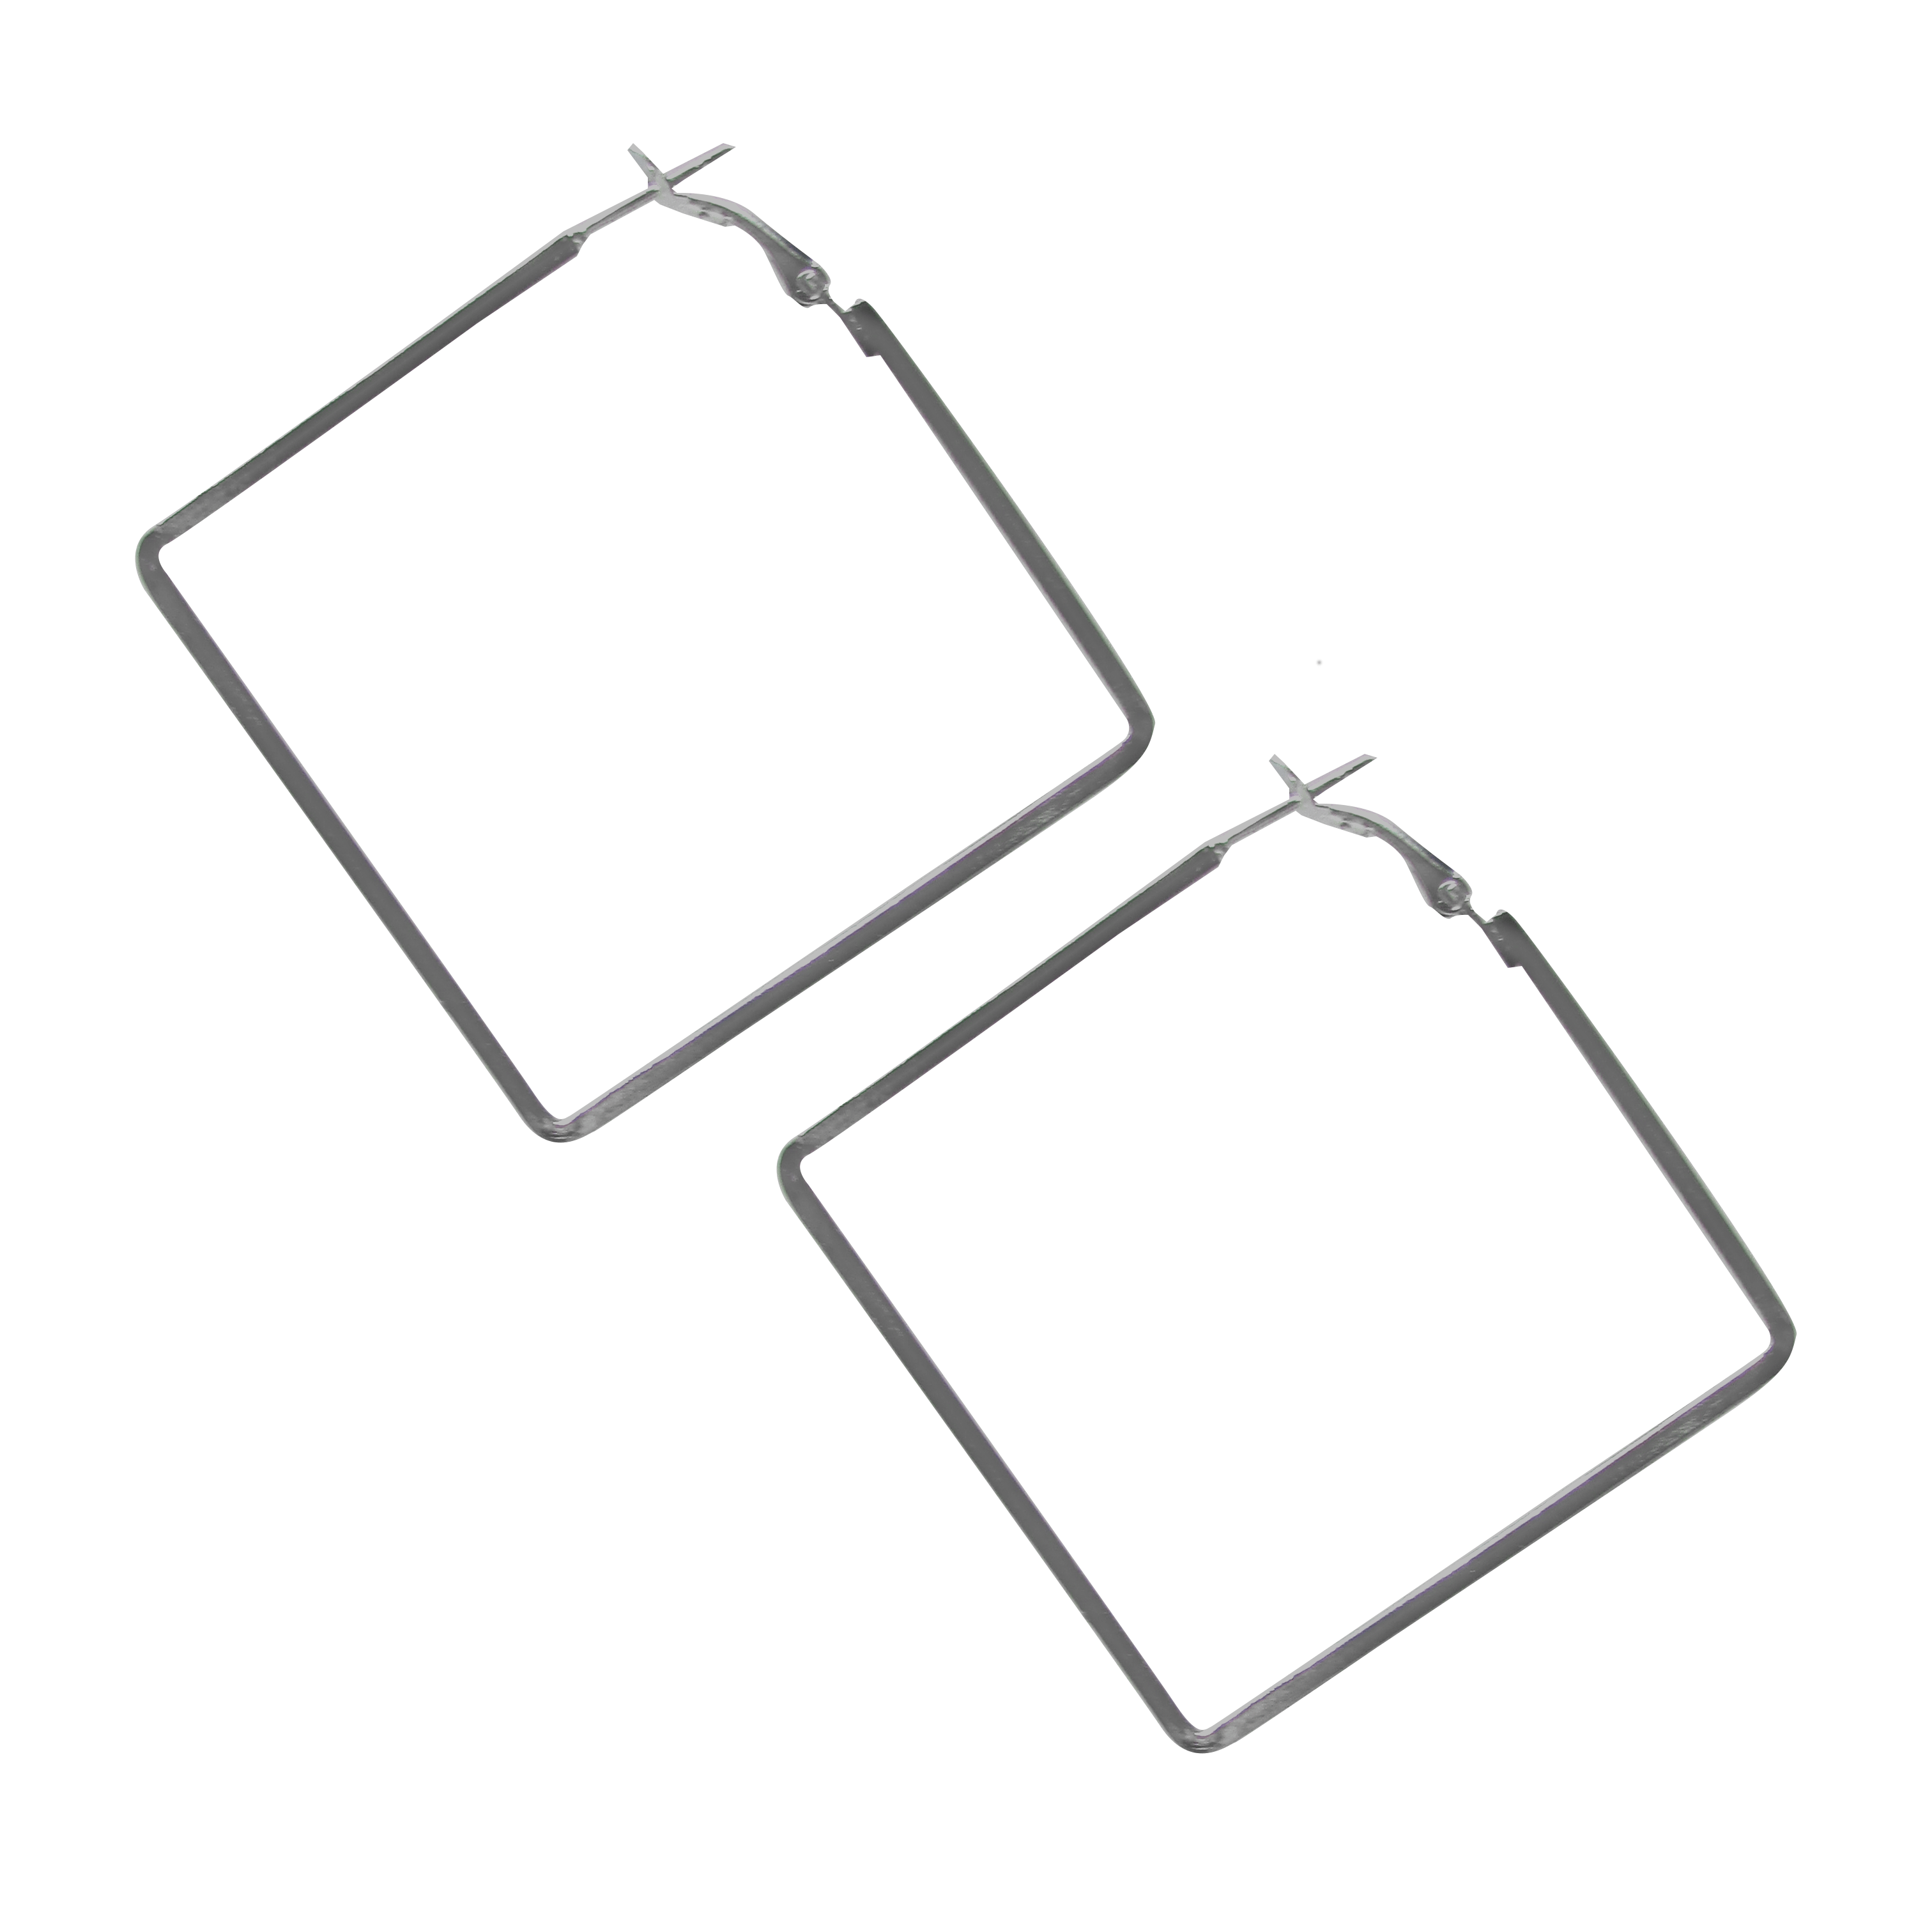 Minimalist Square Stainless Steel Hoop Earrings earrings A Moment Of Now Women’s Boutique Clothing Online Lifestyle Store